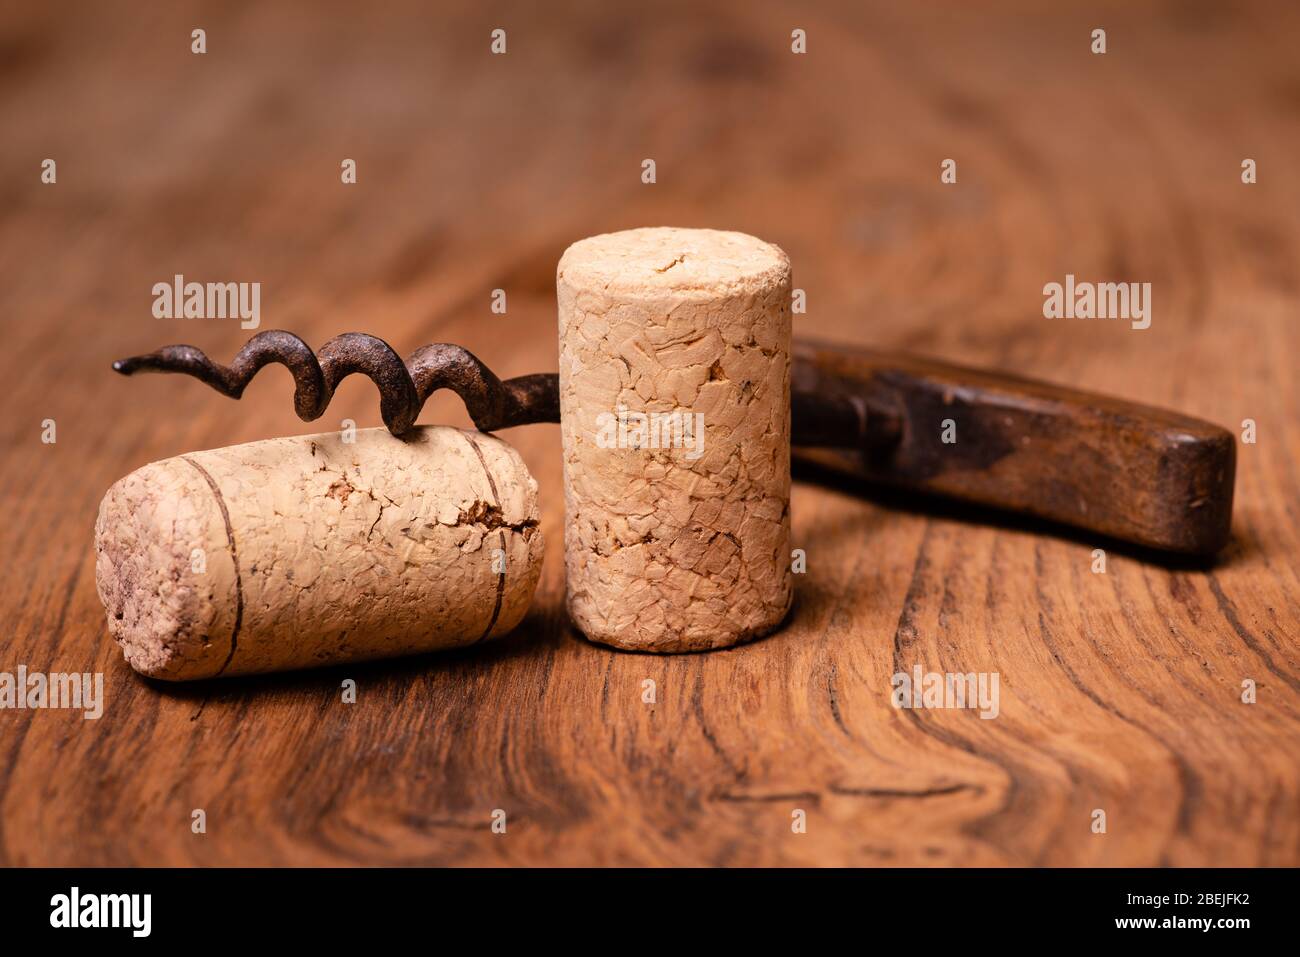 in the foreground, corks of Italian wine, and vintage corkscrews Stock Photo